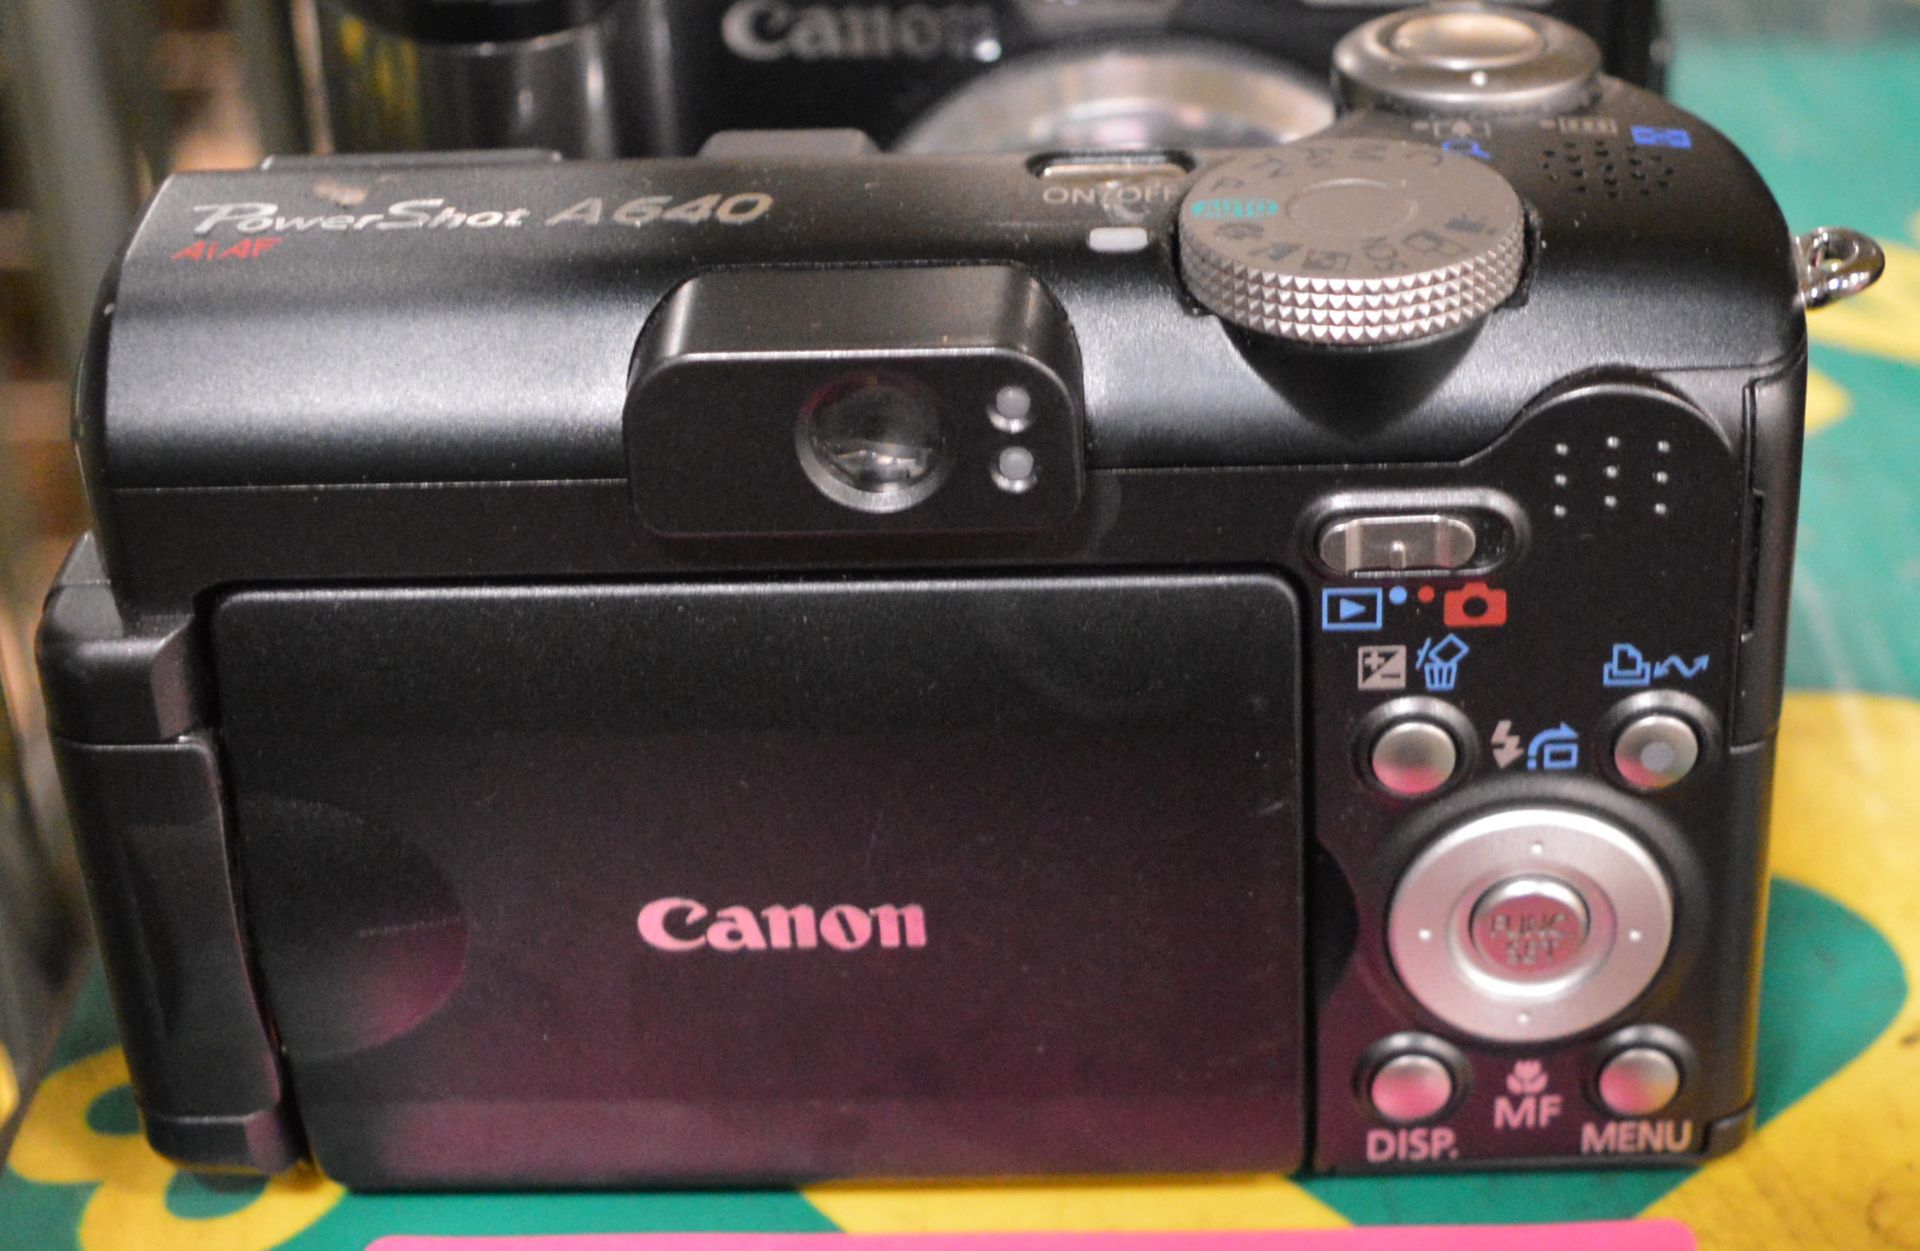 5x Canon PowerShot A640 Digital Cameras - Not Tested. - Image 2 of 2